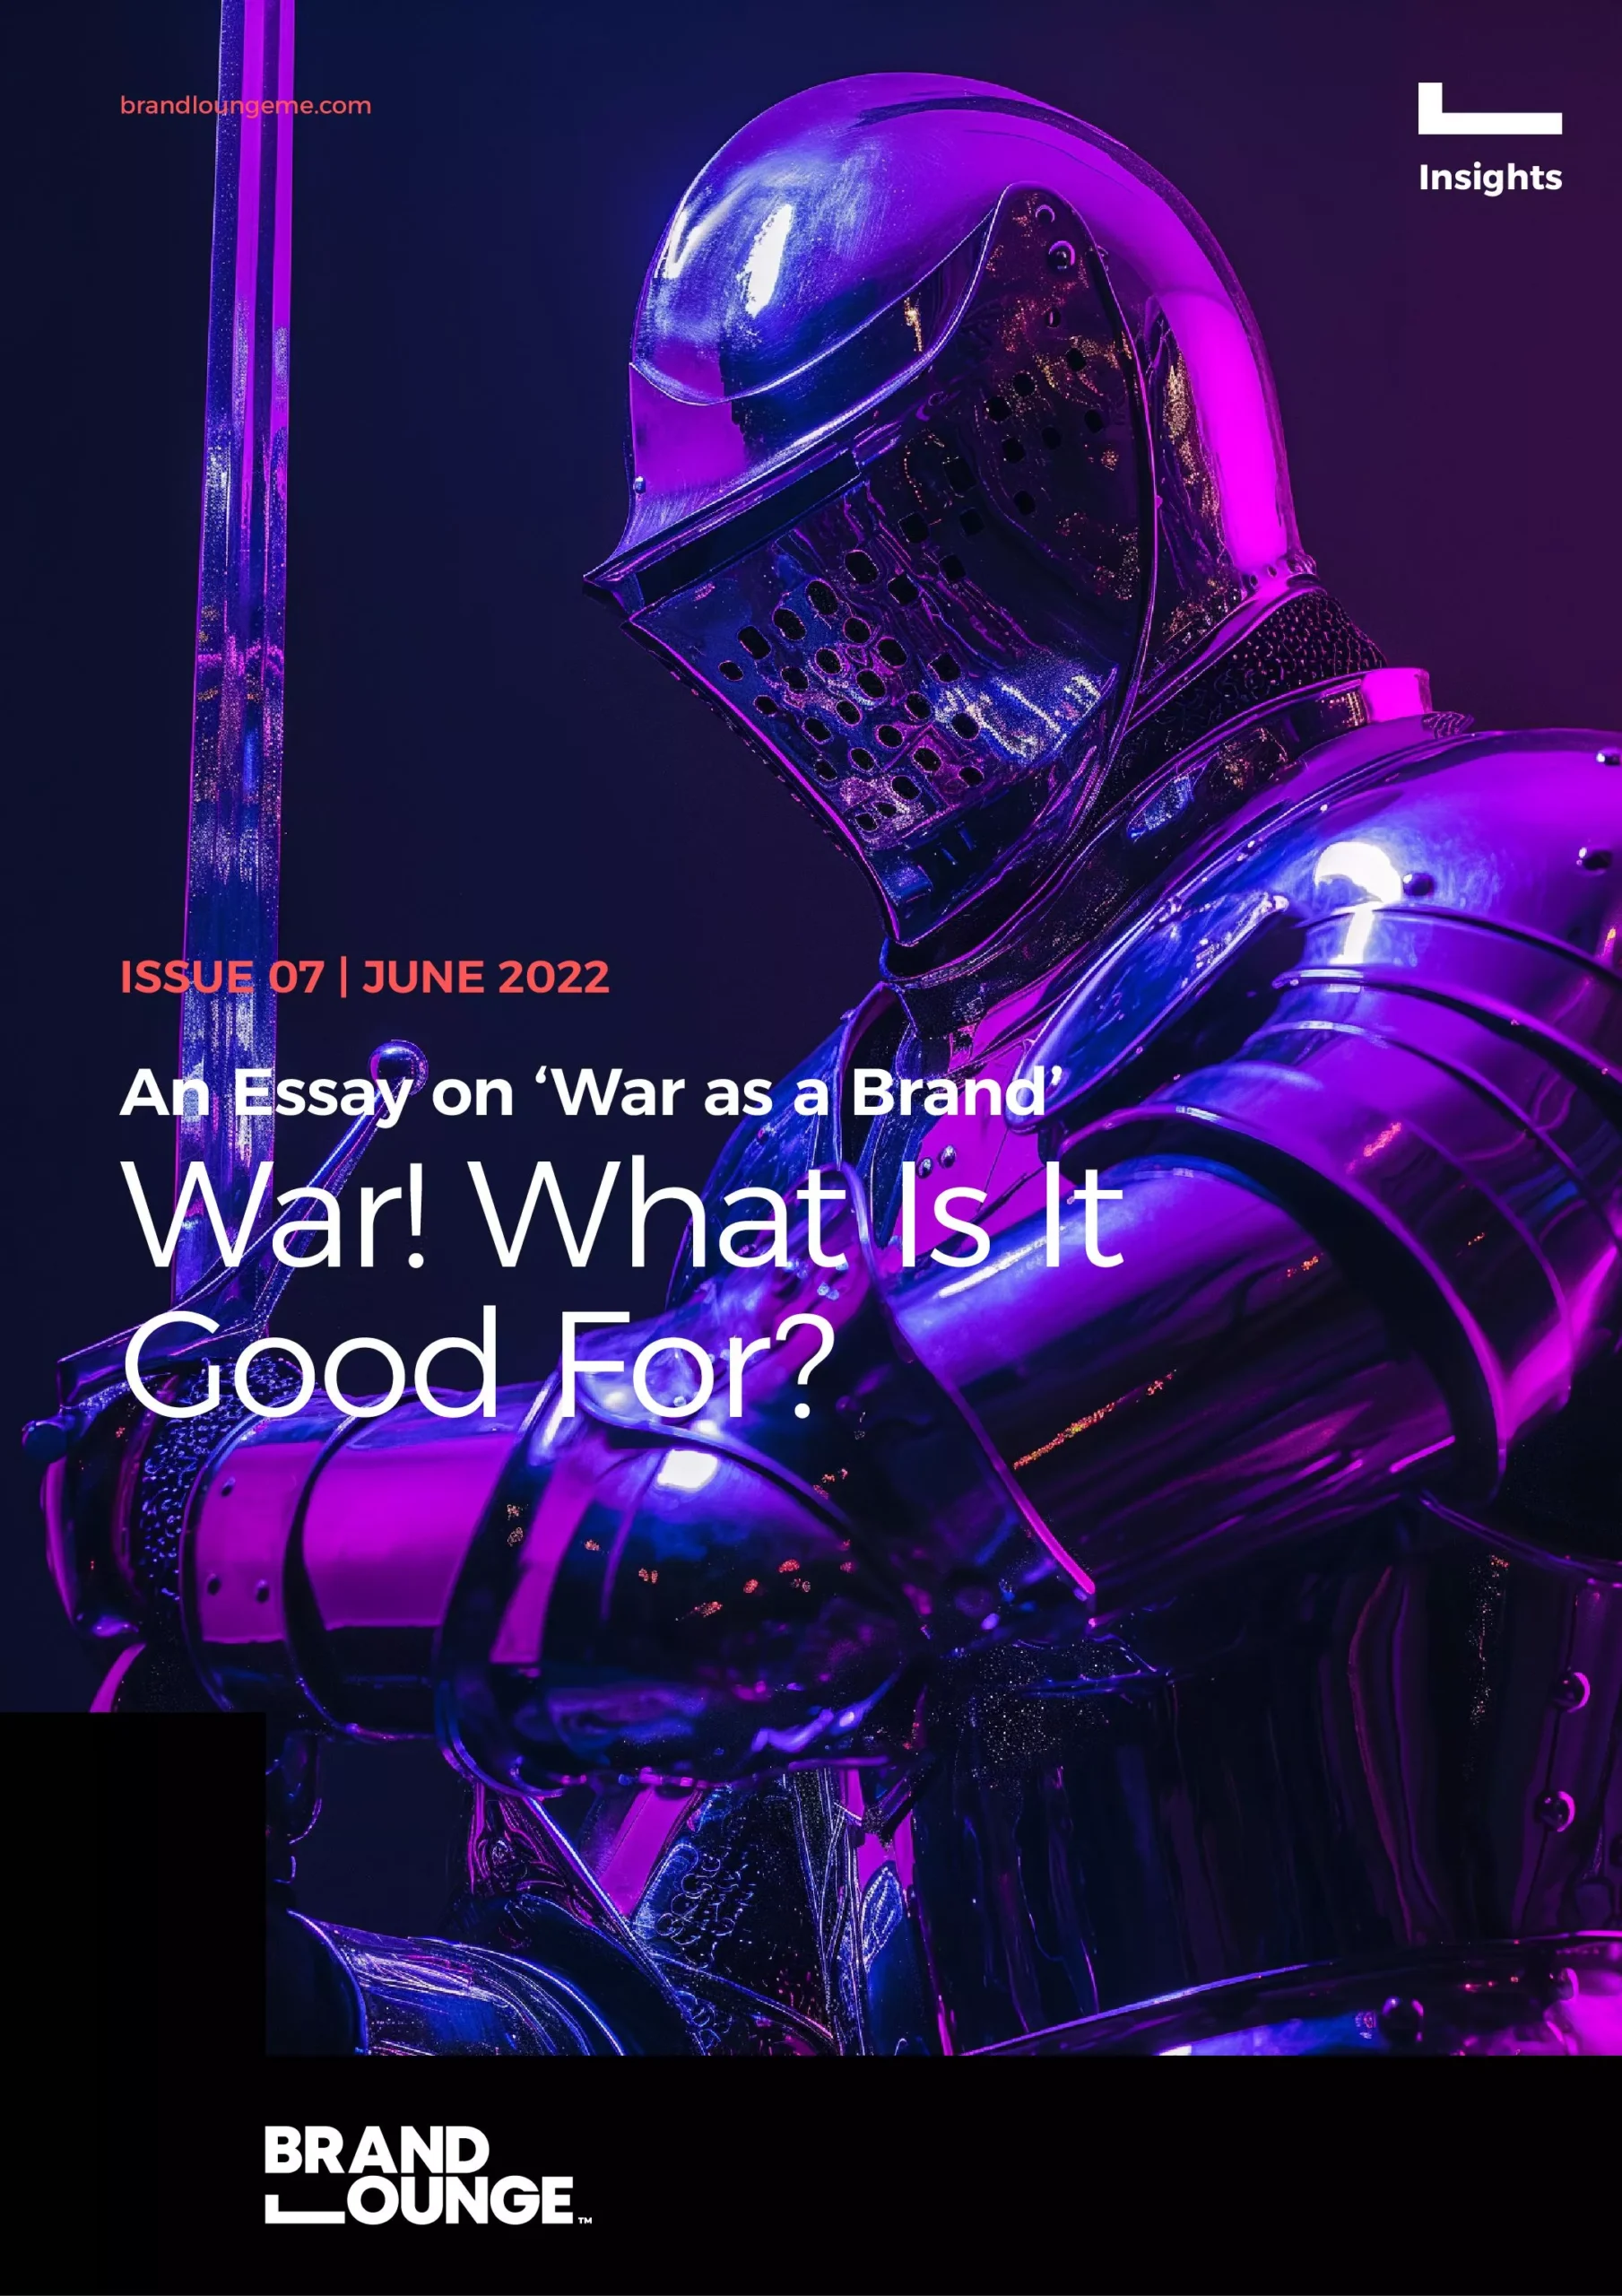 War! What is it good for?